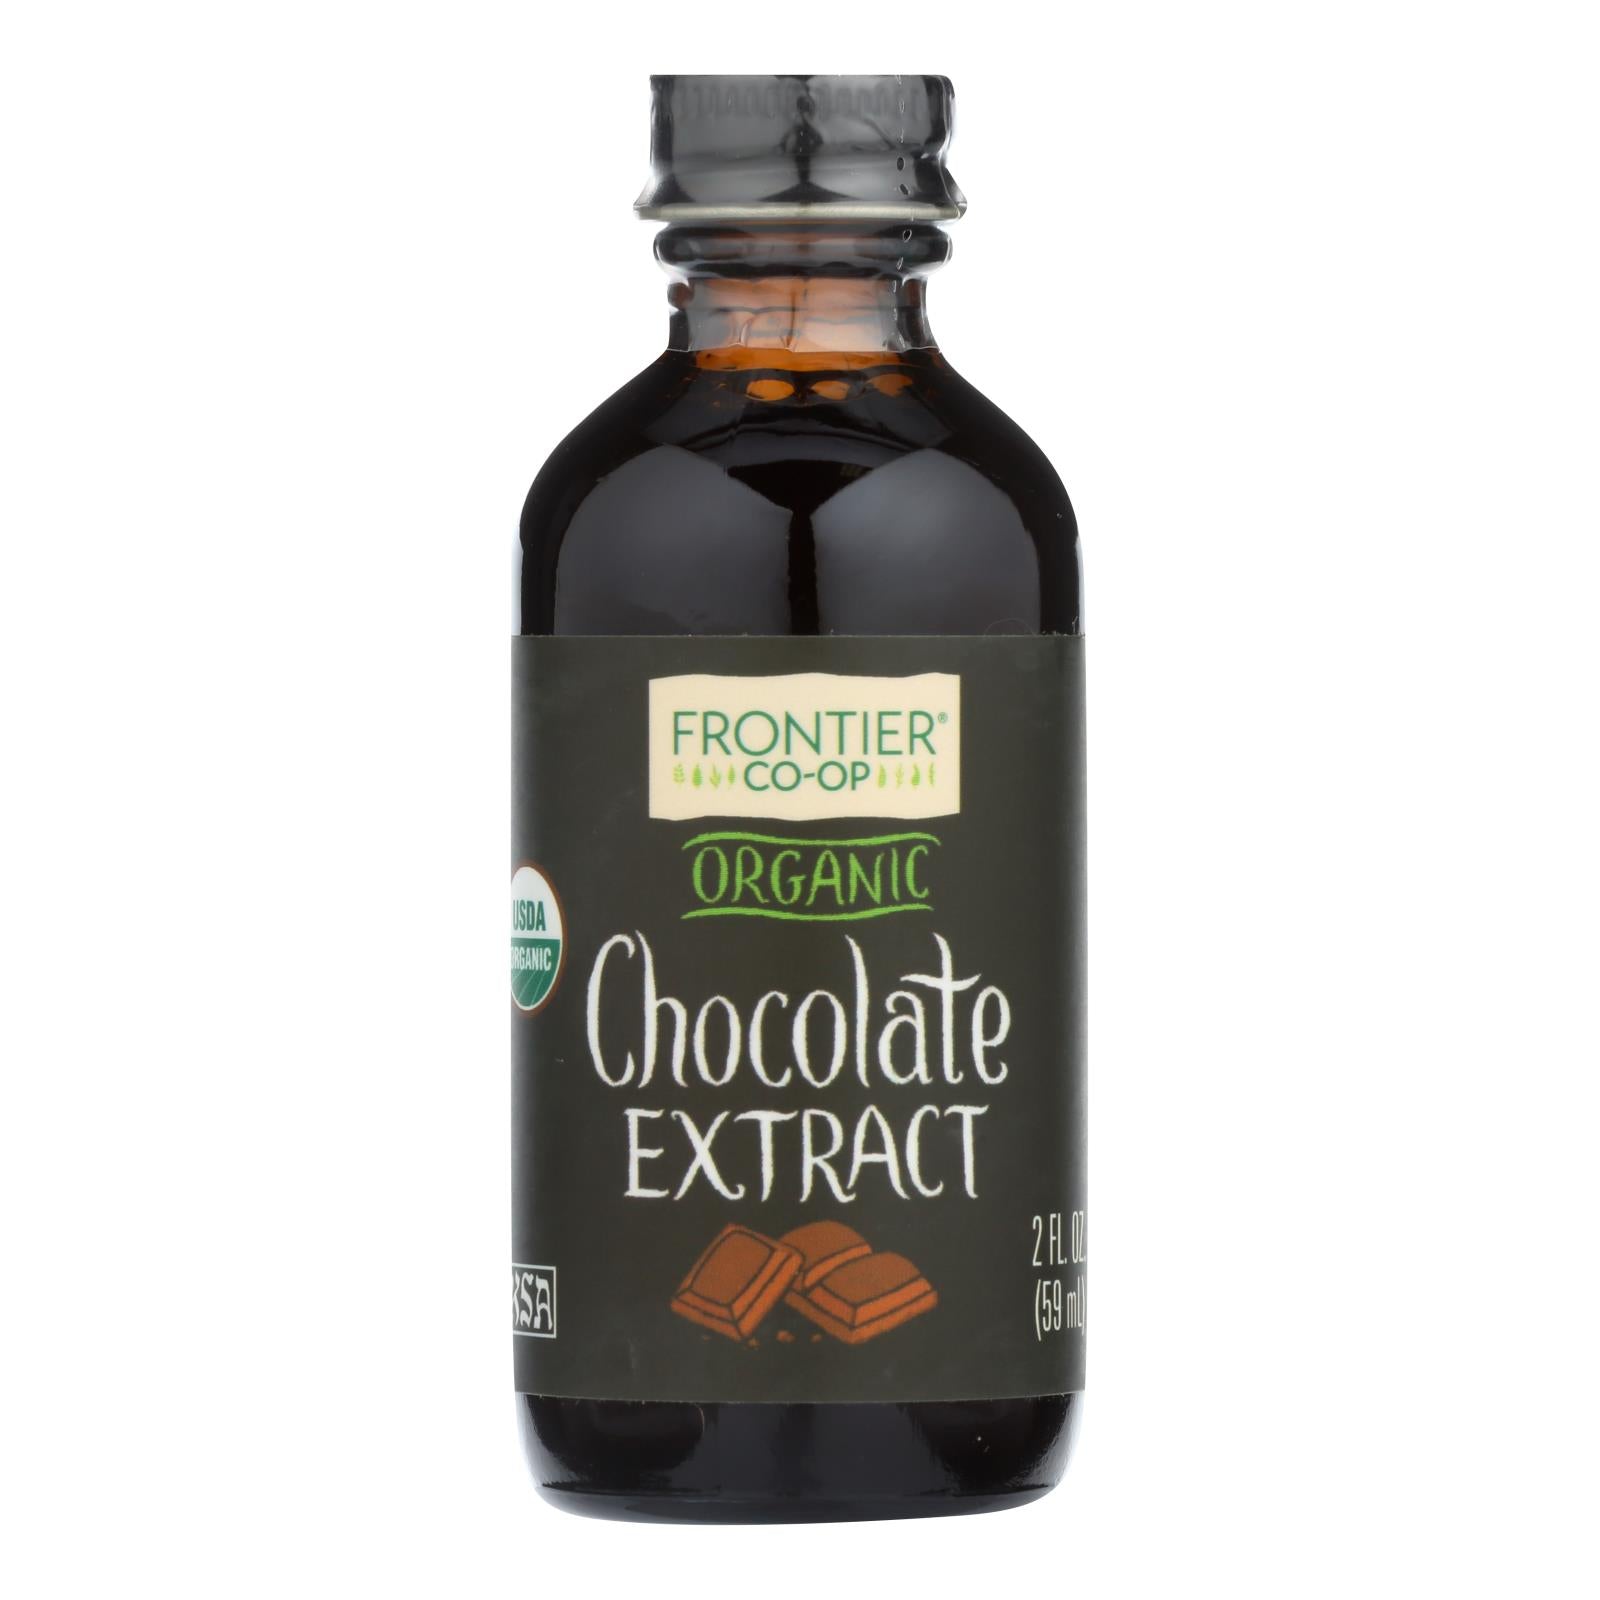 Frontier Herb Chocolate Extract - Organic - 2 Oz - Whole Green Foods